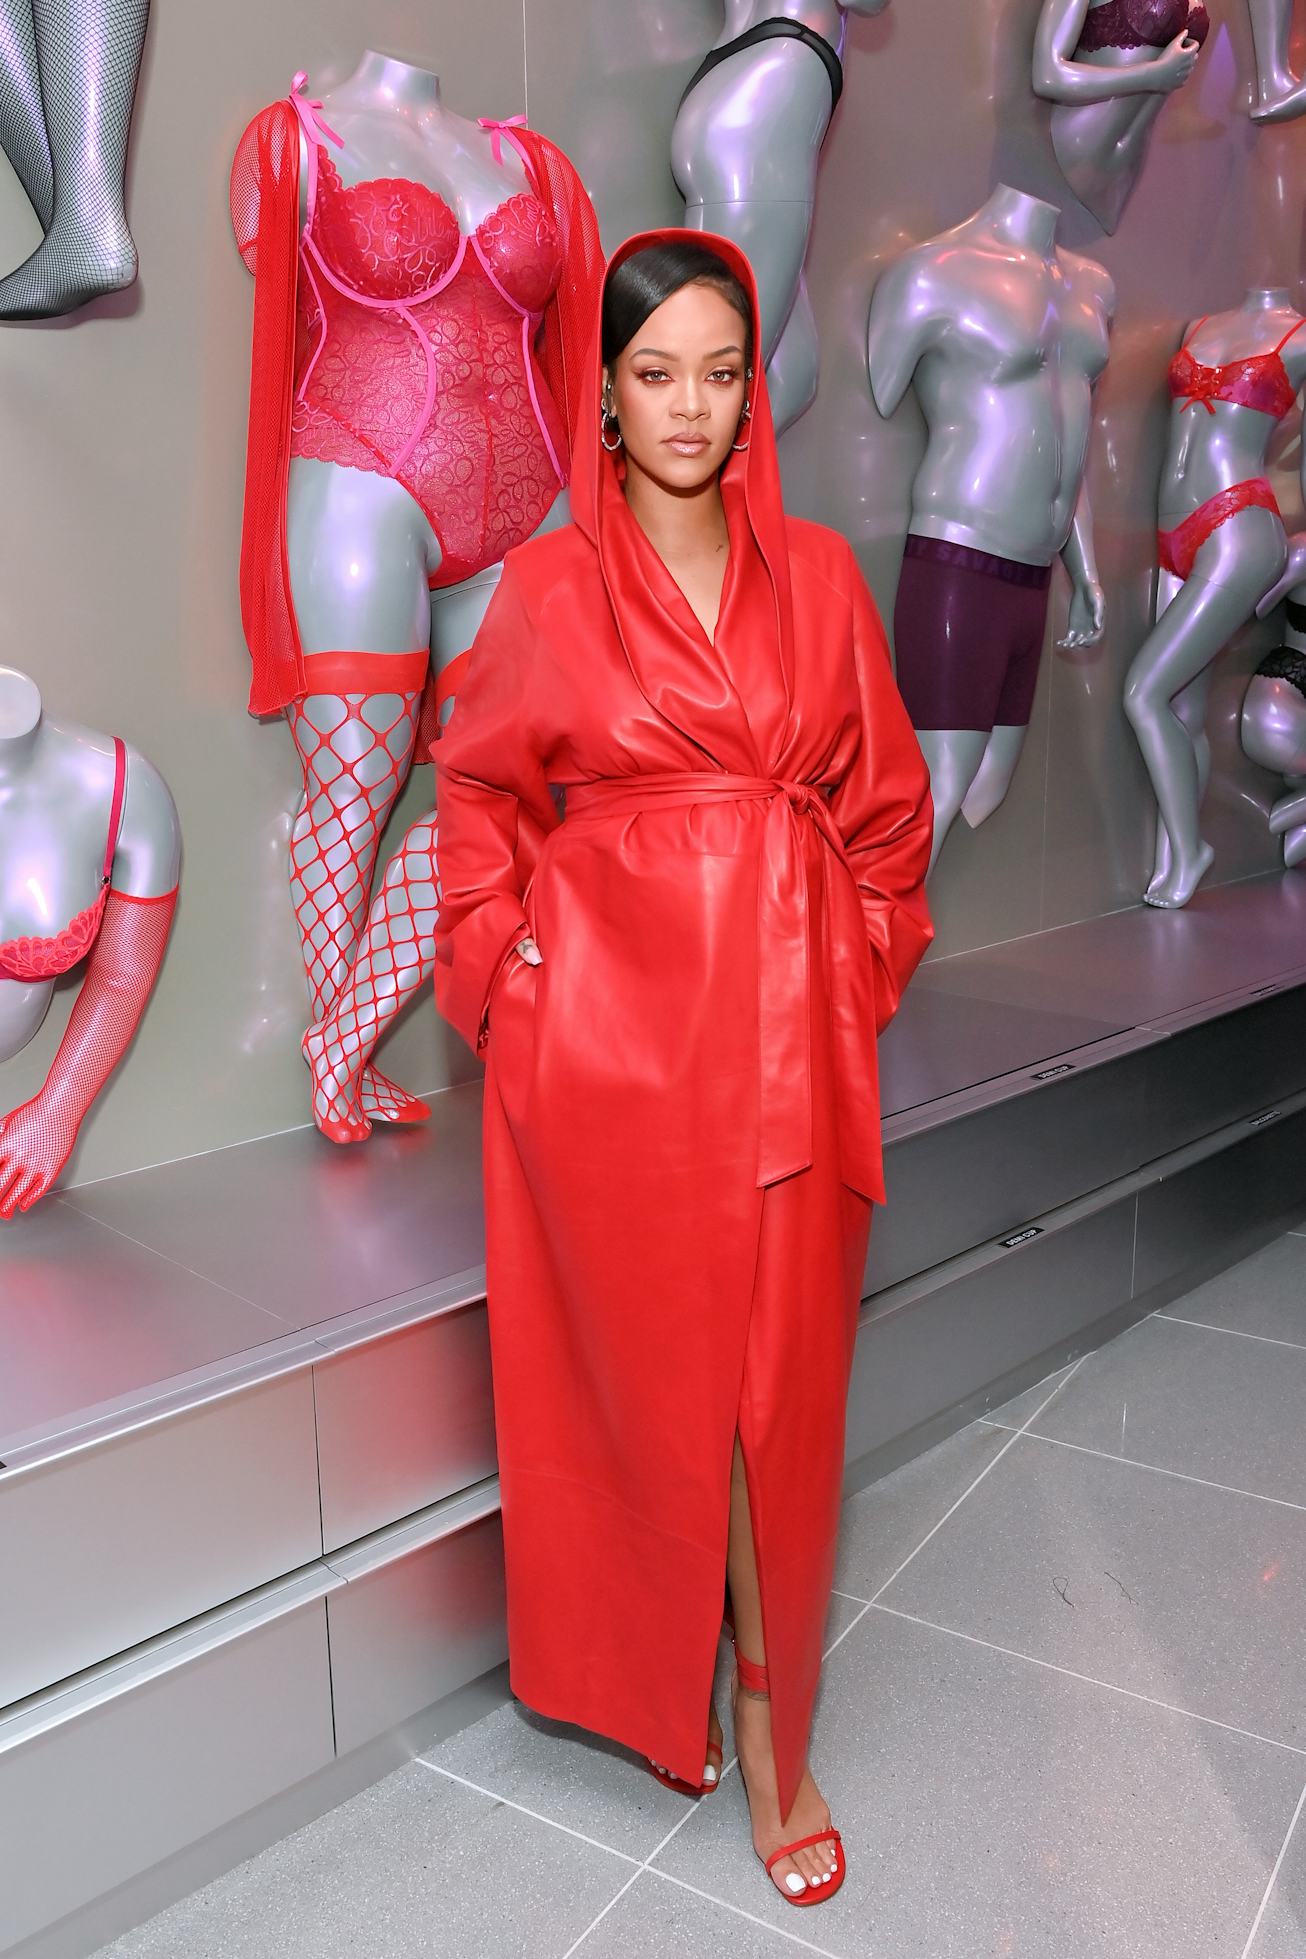 Rihanna at the first Savage X Fenty store opening.